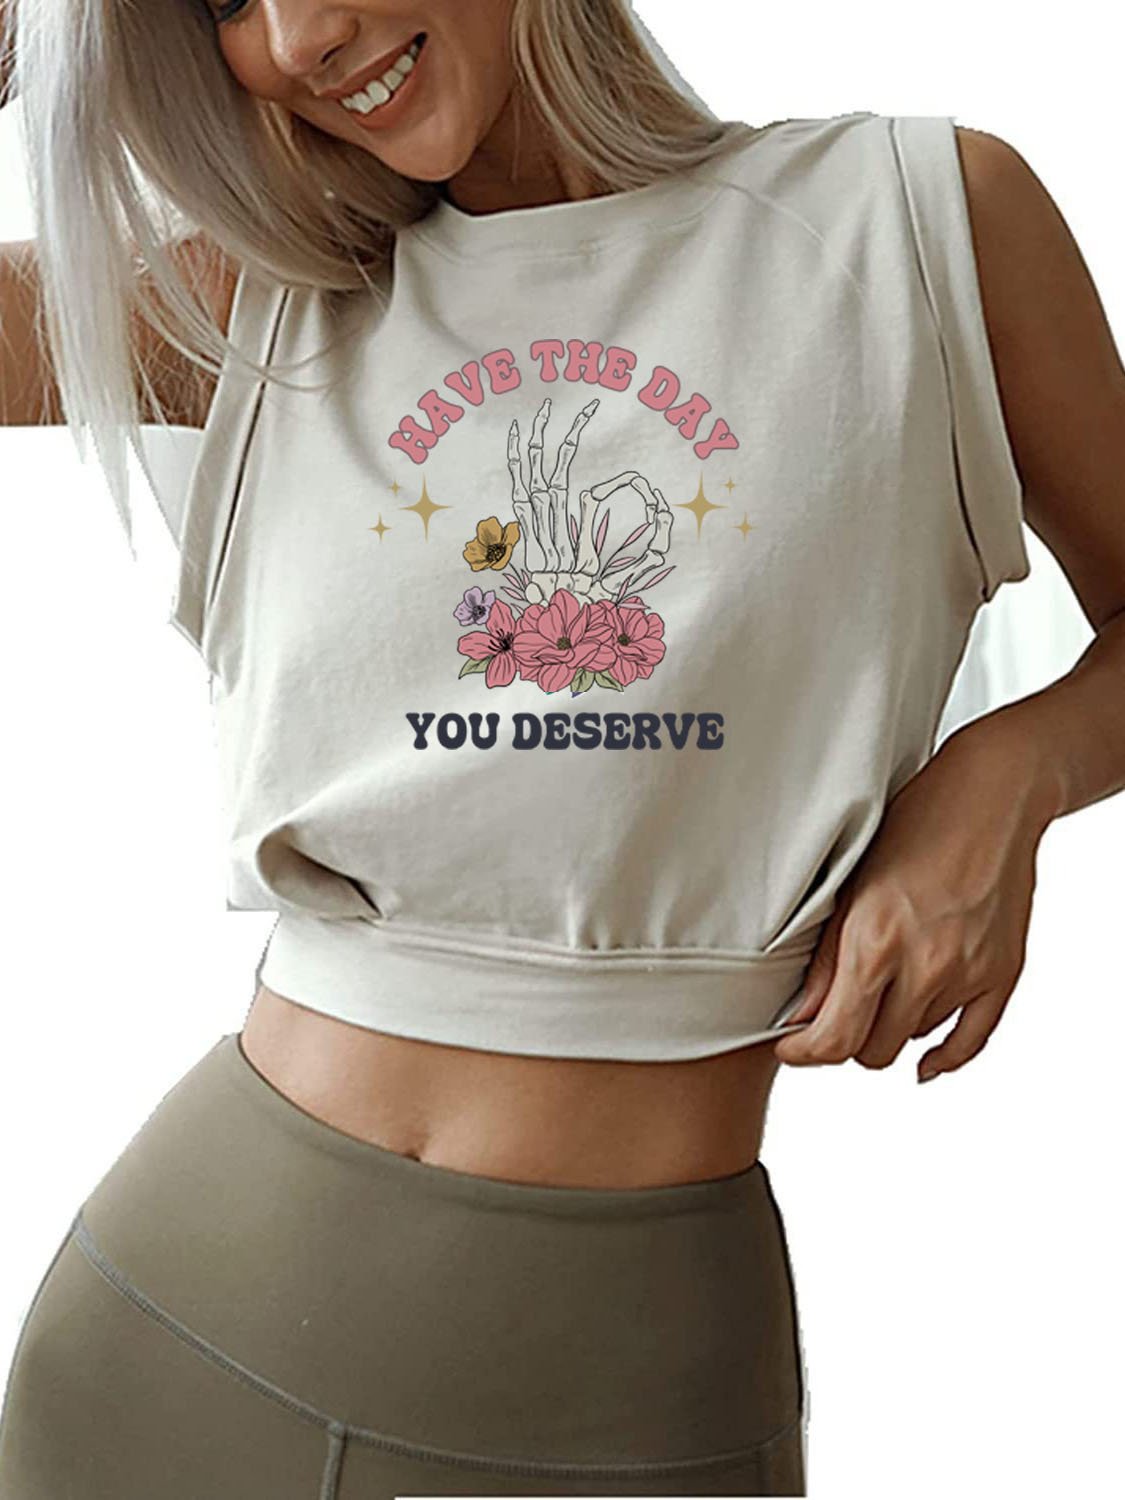 HAVE THE DAY YOU DESERVE SLEEVELESS CROP TOPS